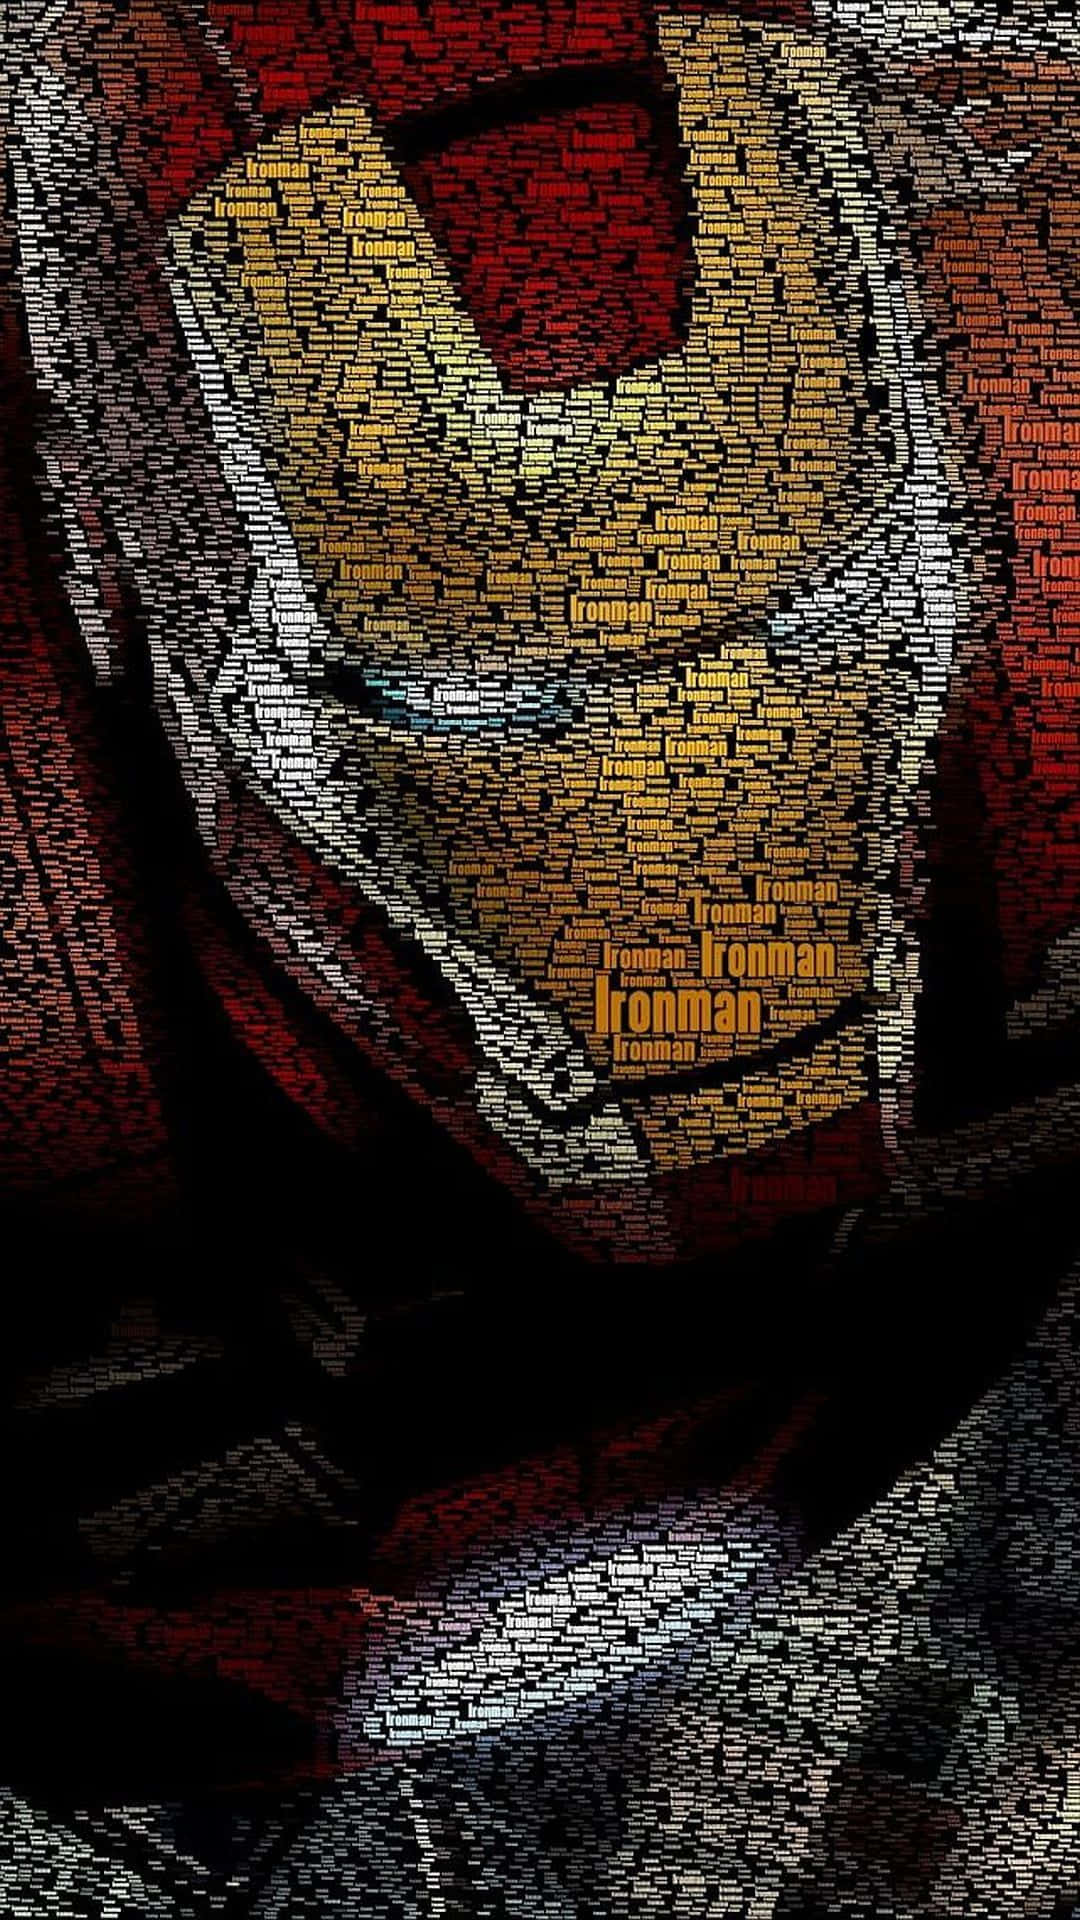 Iron Man In A Word Art